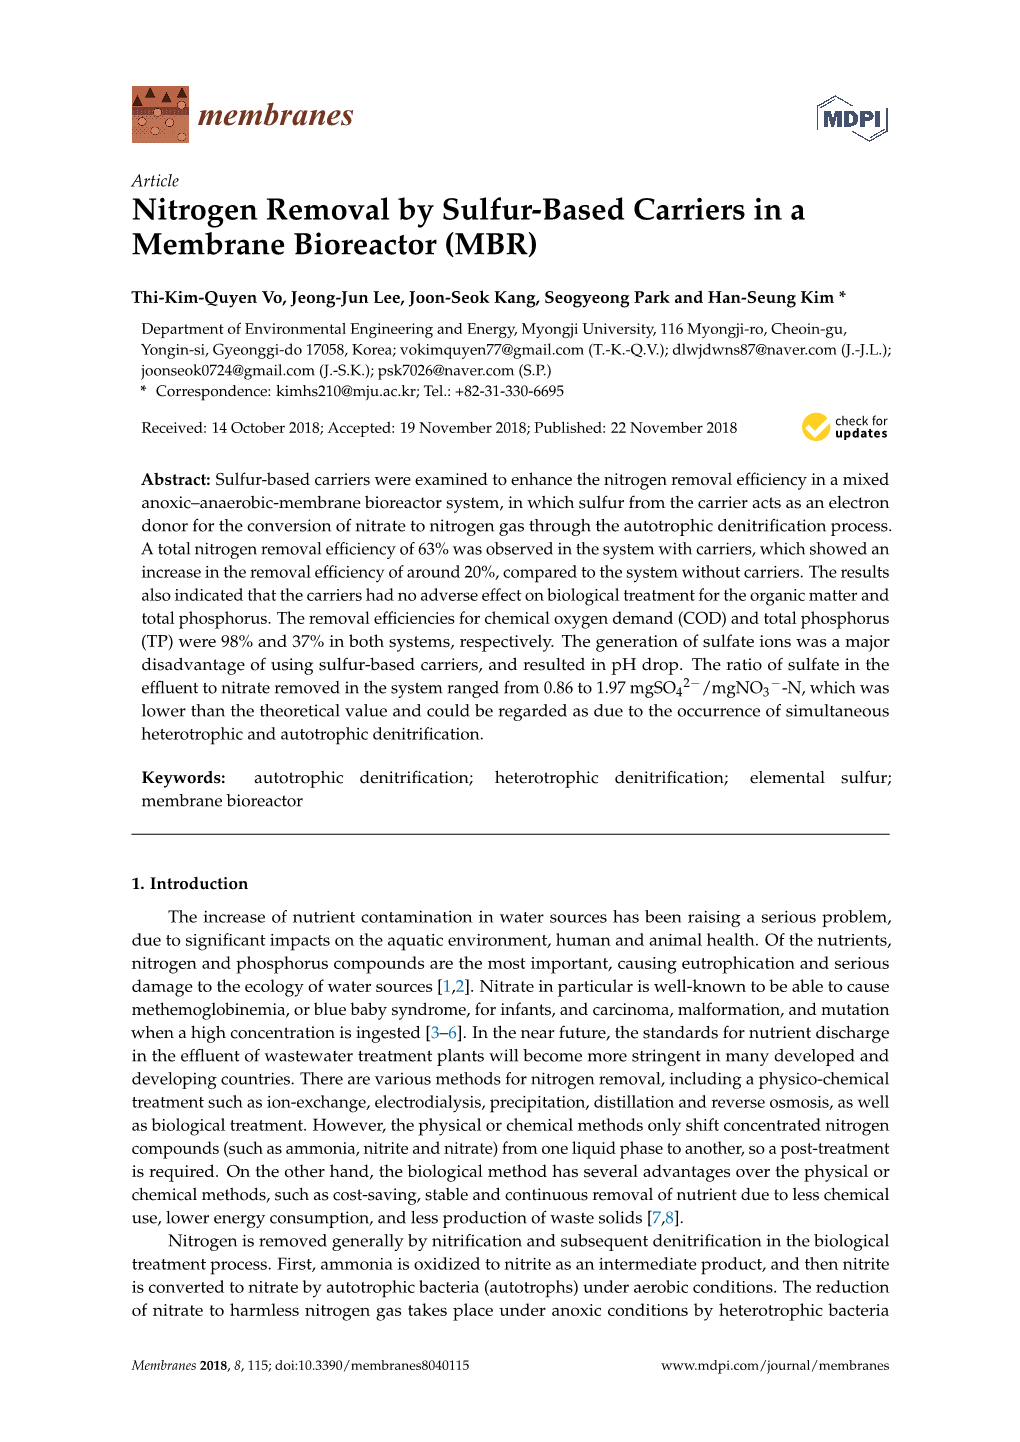 Nitrogen Removal by Sulfur-Based Carriers in a Membrane Bioreactor (MBR)